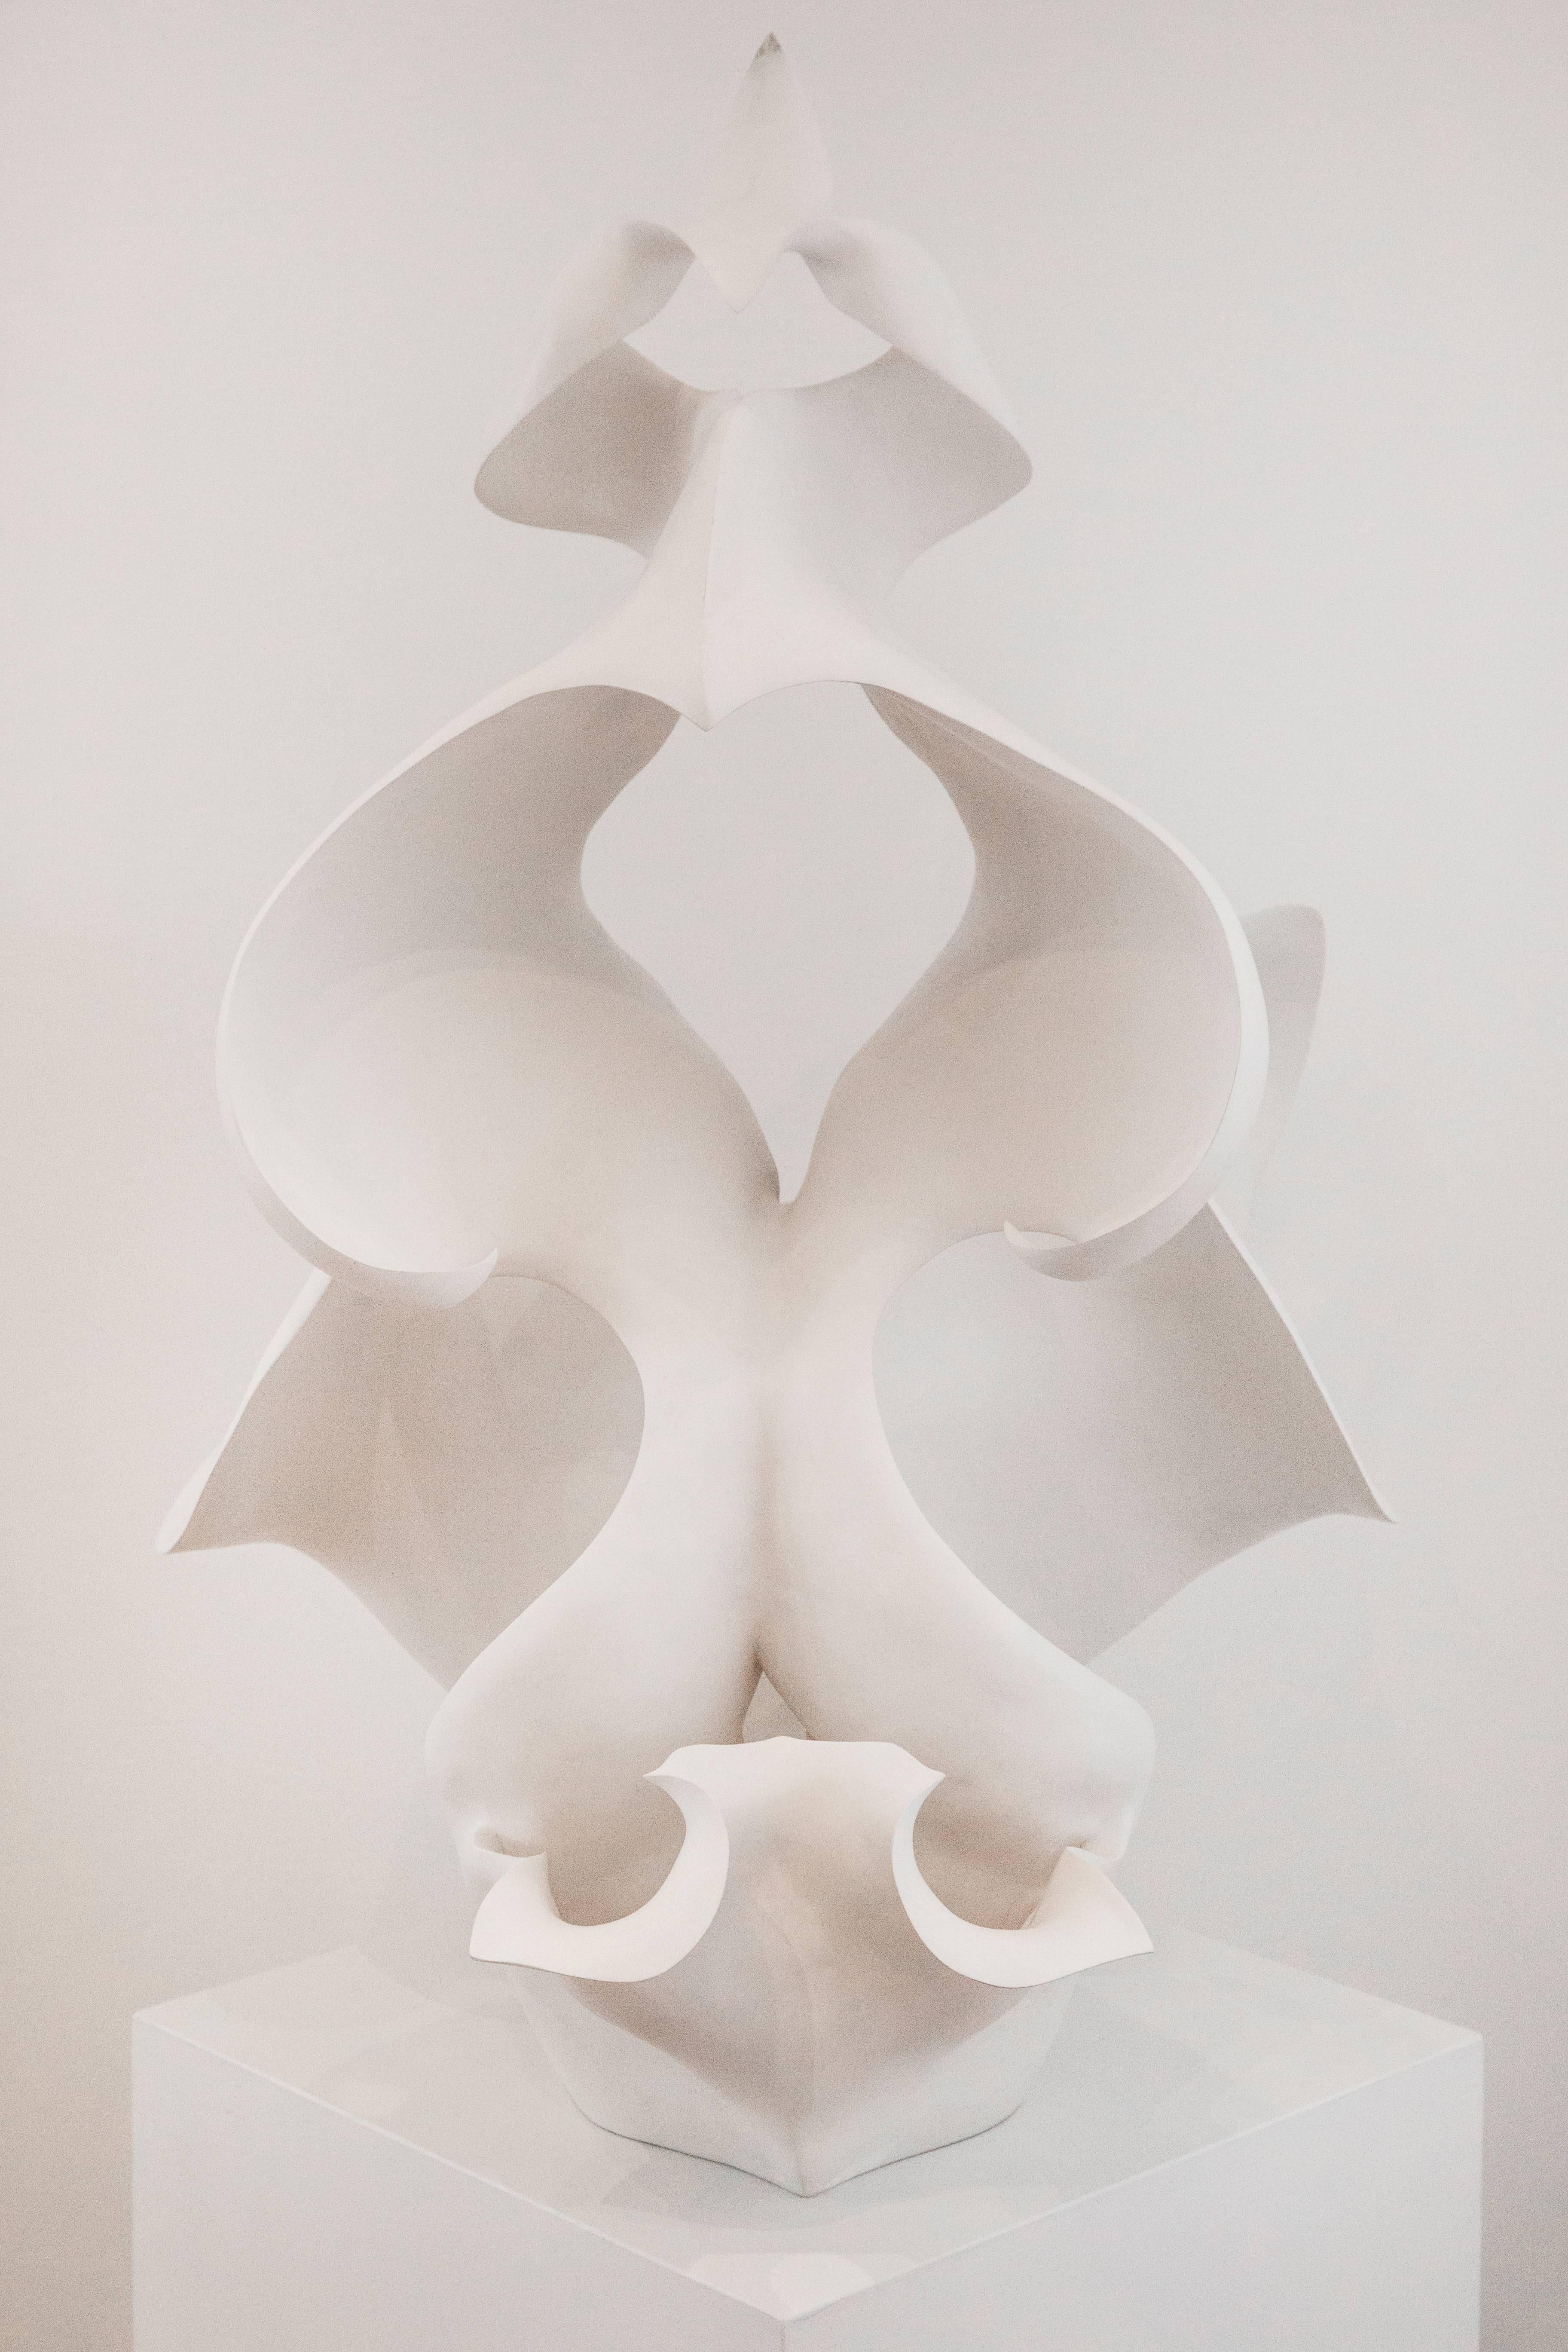 The photographic work of late XIXth century German botanist Karl Blossfeldt has fascinated ceramicist Astrid Dahl since she studied at The Durban Techinikon of Natal in South Africa in the mid-Nineties. Using a homemade camera, Blossfeldt was able